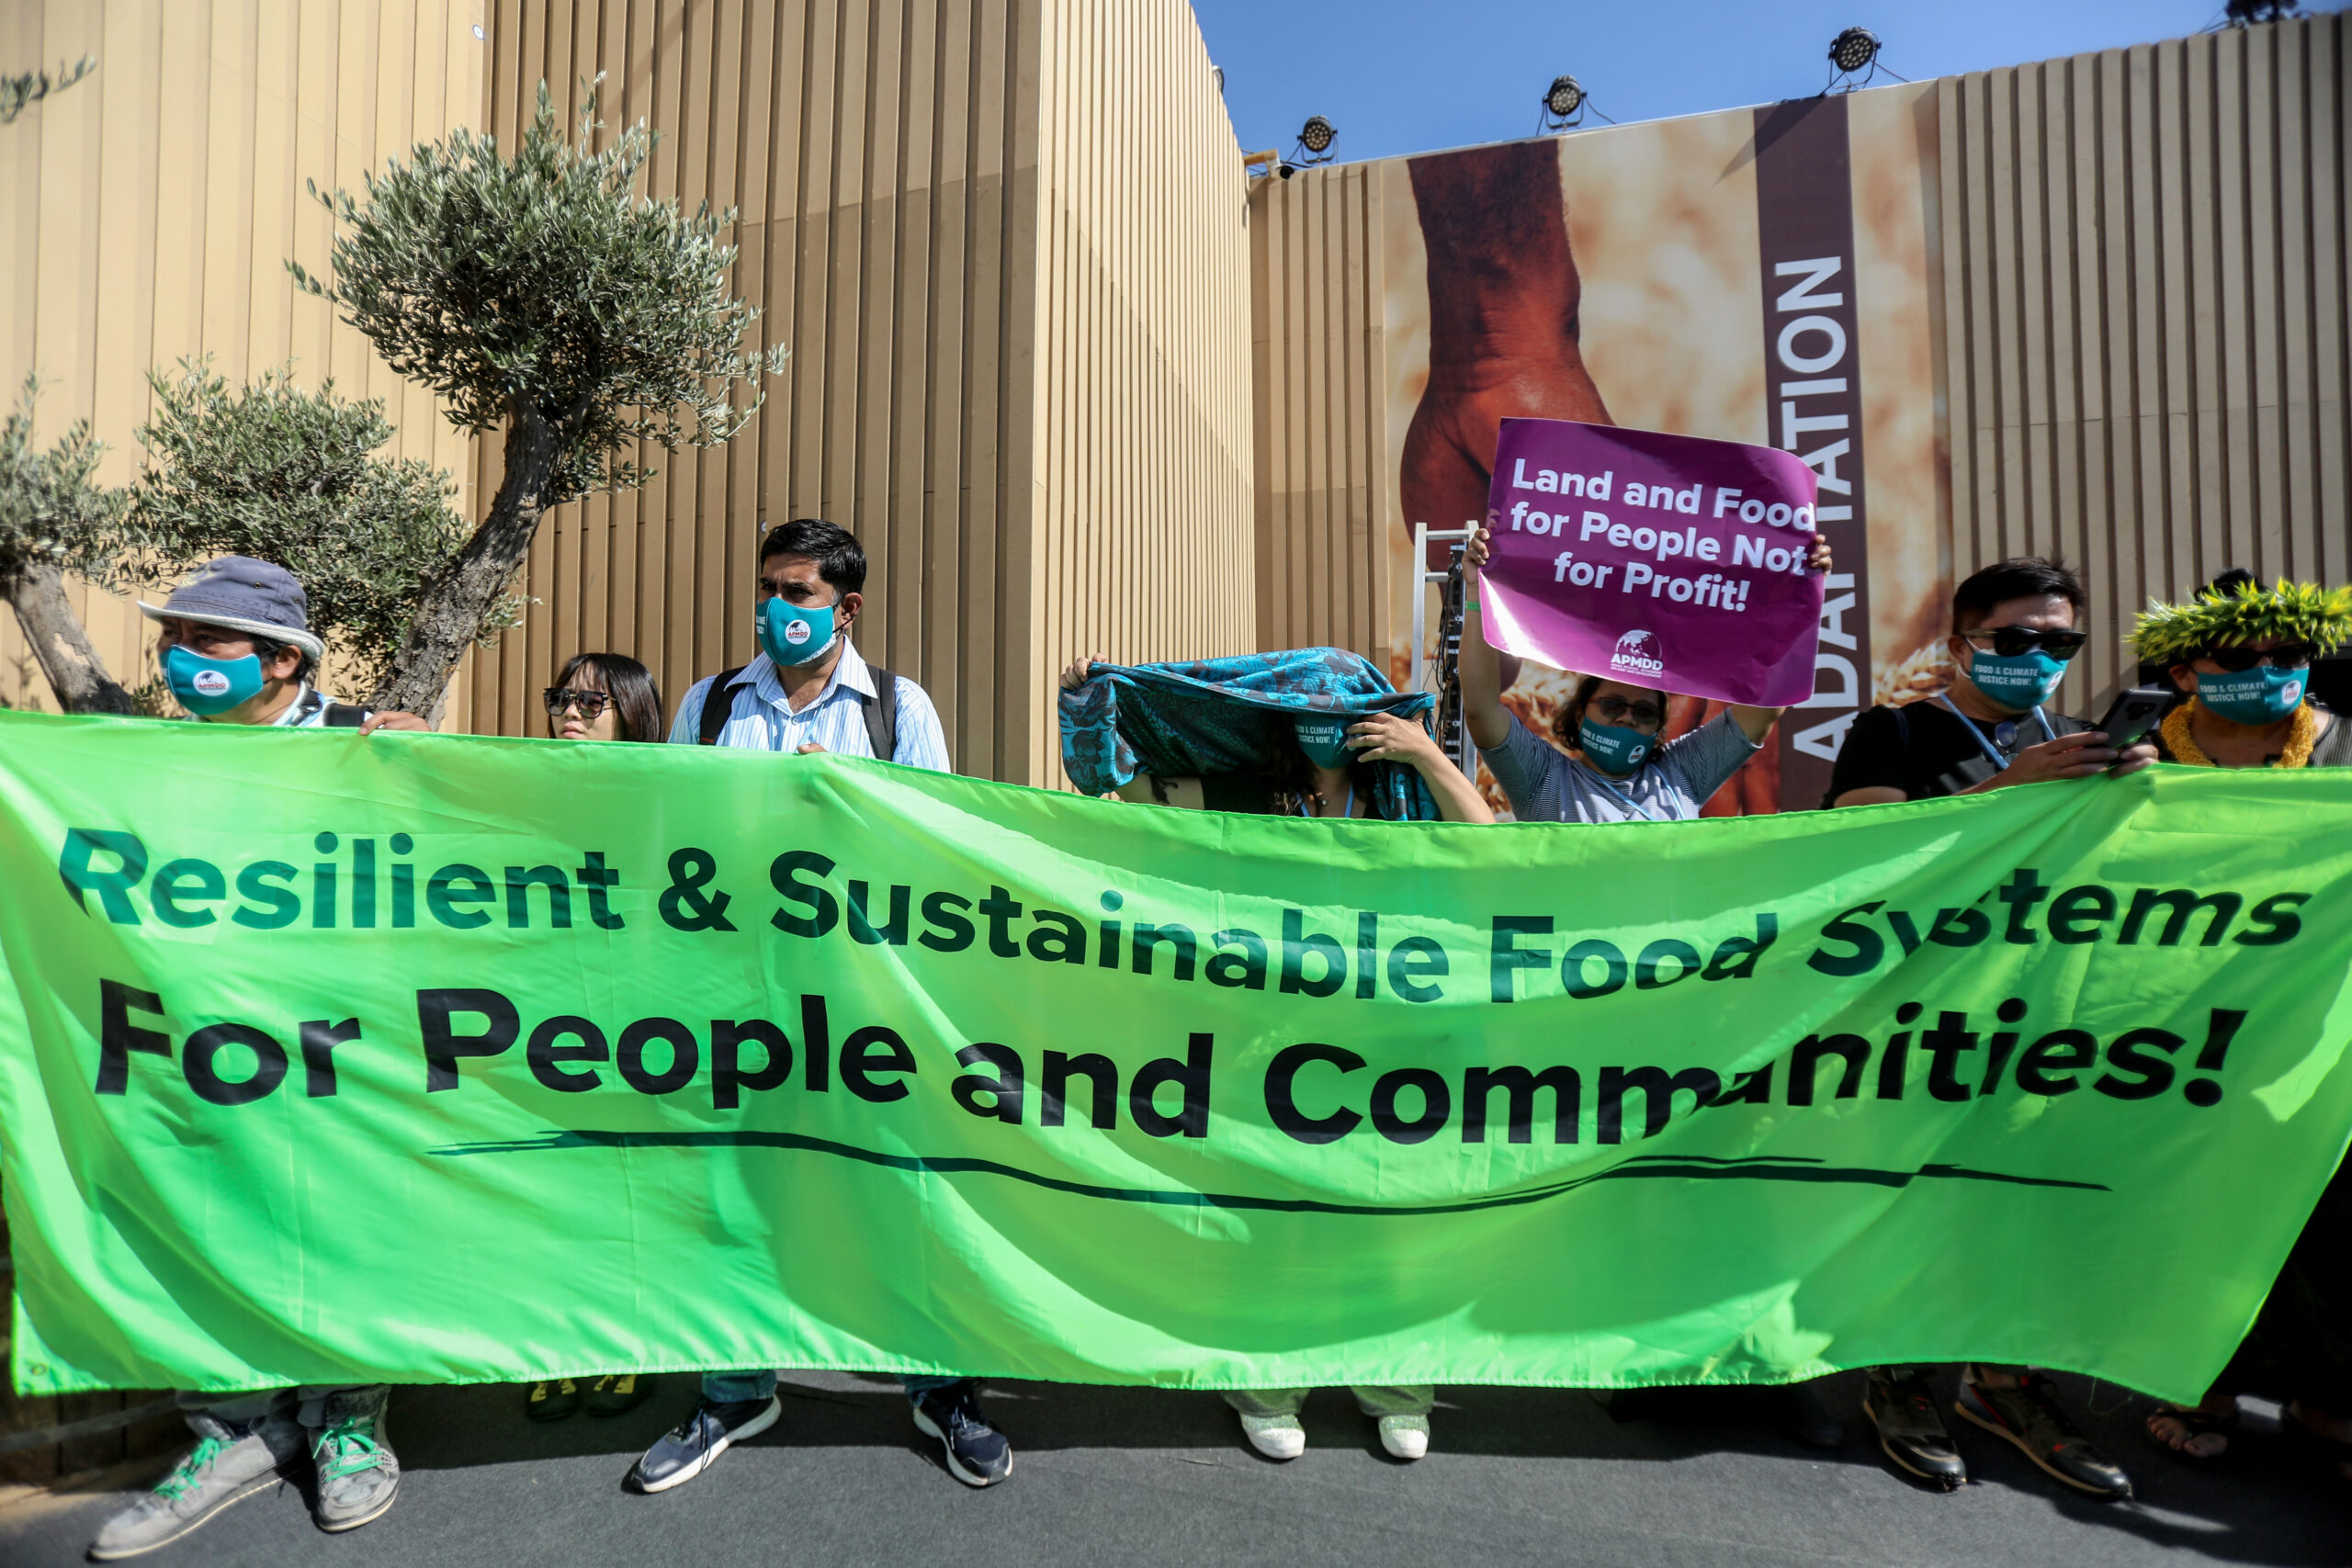 Environmental activists gather in front of the International Convention Center on the 27th Conference of the Parties to the United Nations Framework Convention on Climate Change (COP27) in Sharm El Sheikh, Egypt on November 14, 2022 [Mohamed Abdel Hamid/Anadolu Agency]